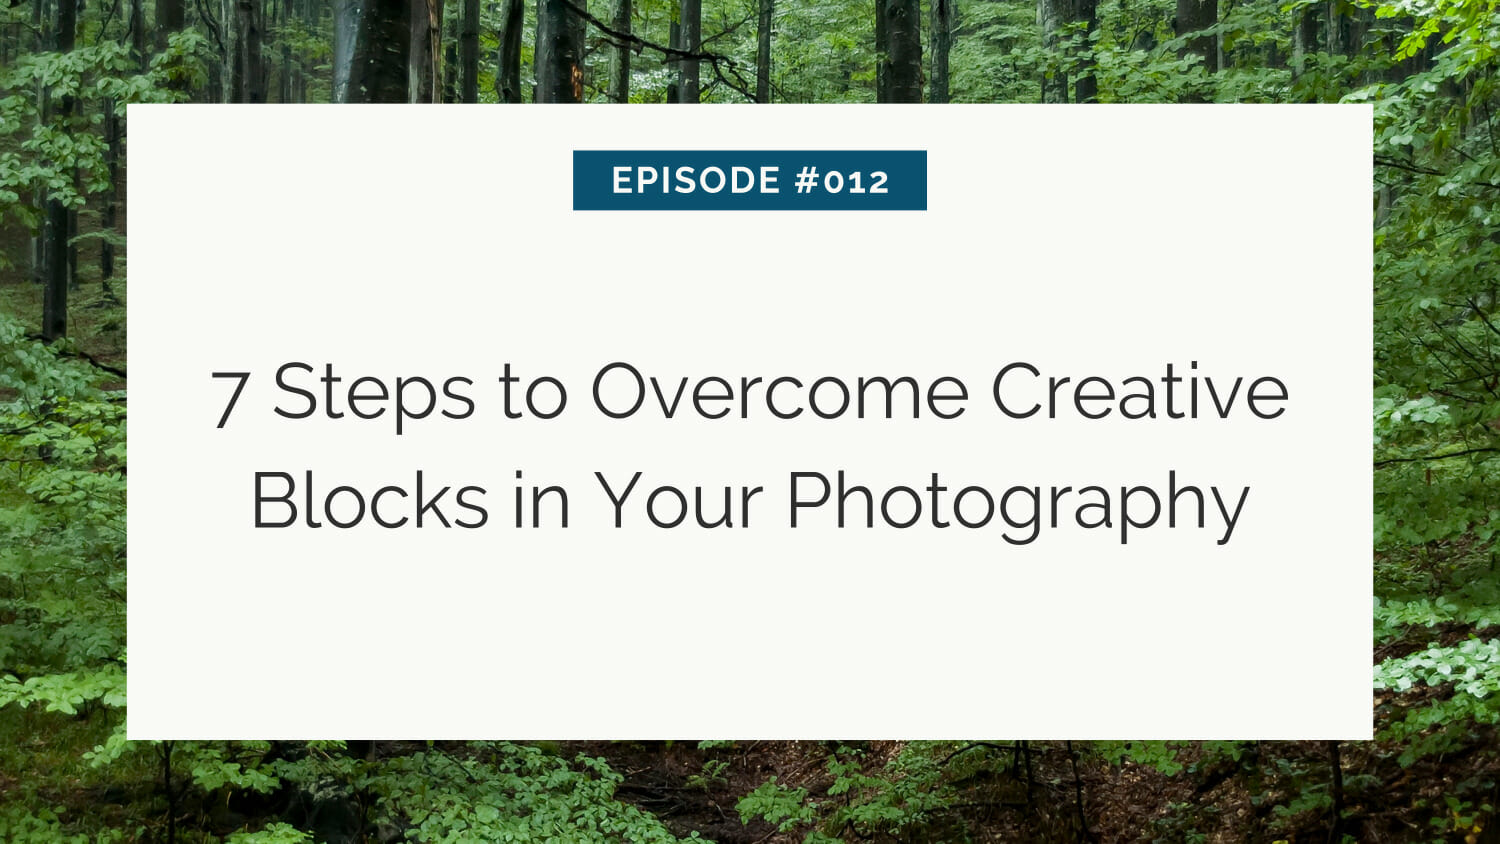 Title slide for a tutorial or podcast episode on overcoming creative blocks in photography, episode number 12, set against a backdrop of a forest.